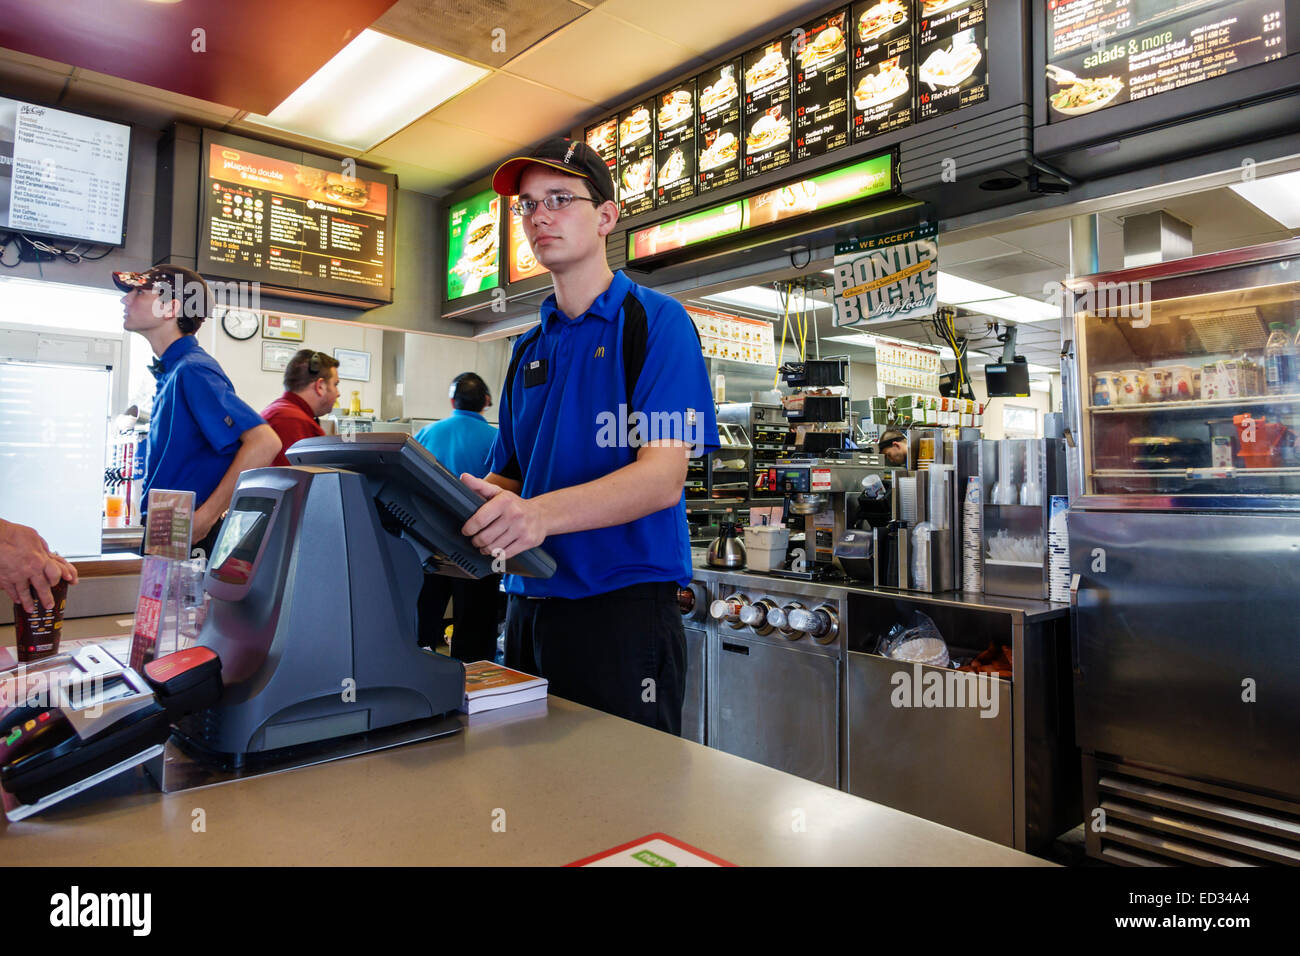 Illinois Gibson City,McDonald's,fast food,restaurant restaurants dining cafe cafes,counter,man men male,employee worker workers working staff,working, Stock Photo